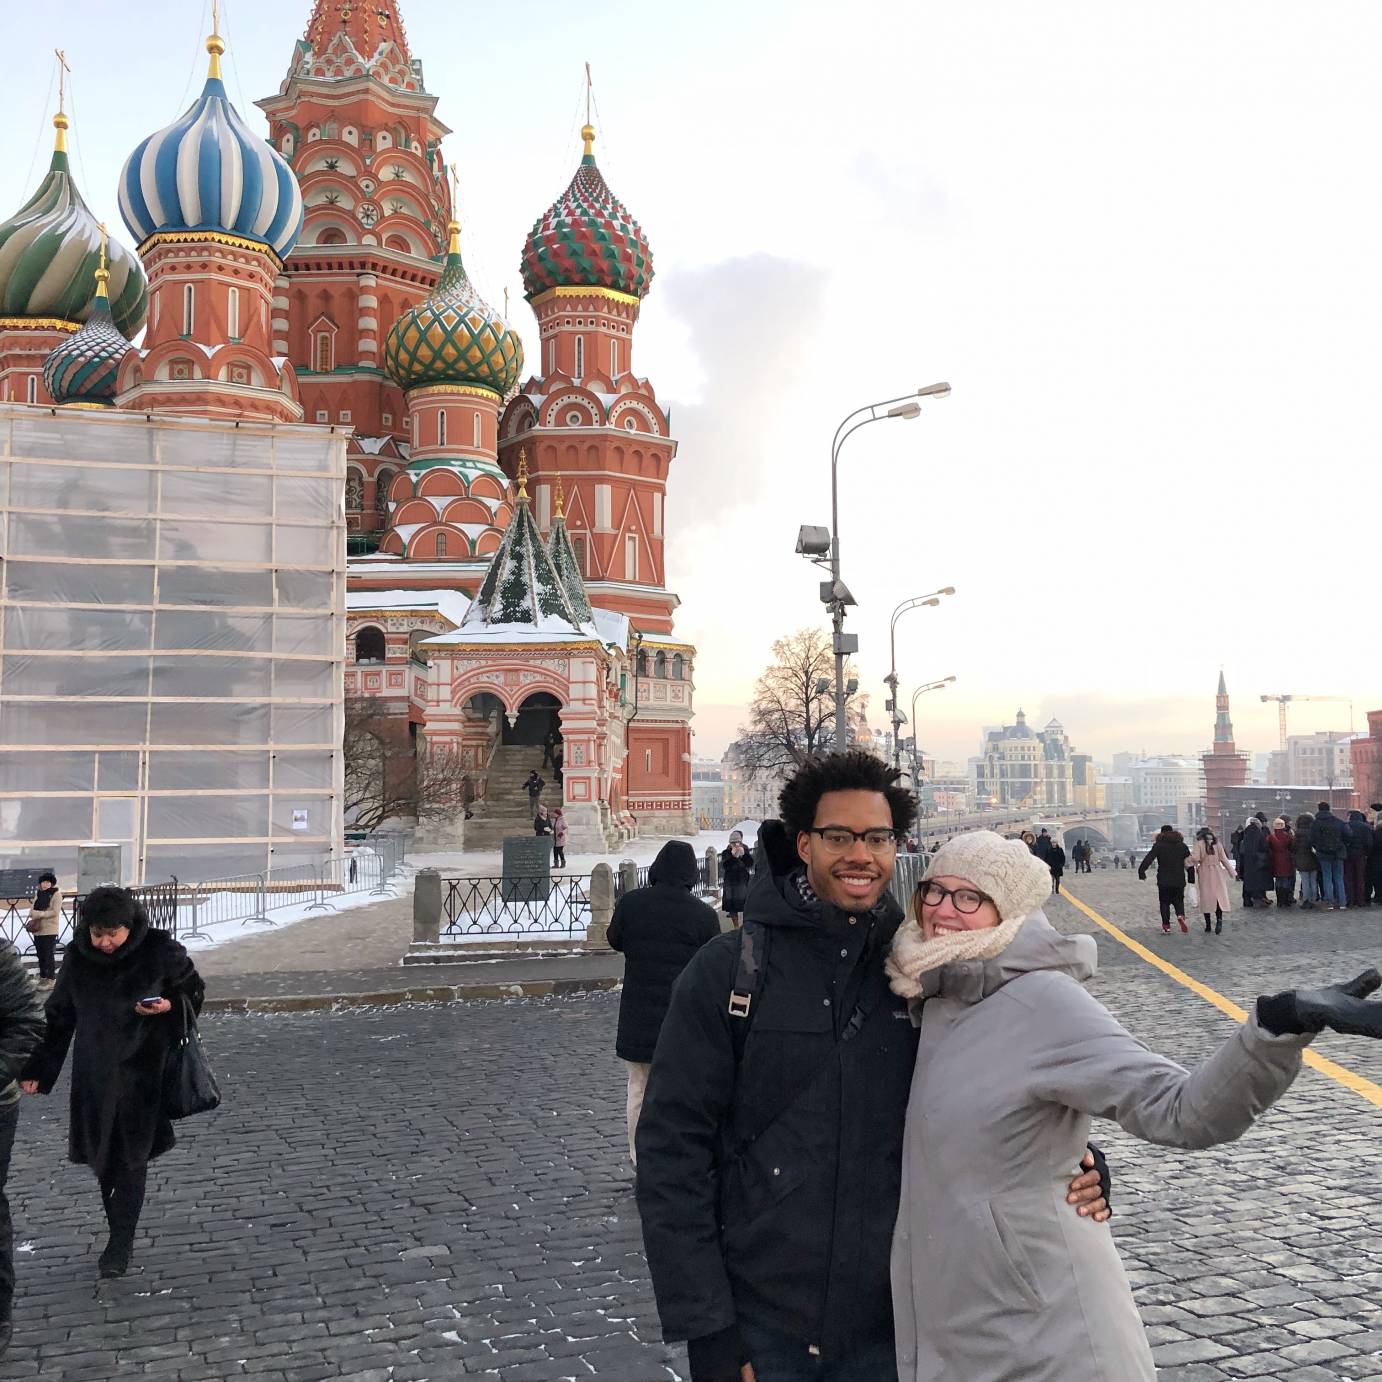 Carissa Landes and her husband, dressed in heavy coats, pose in front of St. Basil's